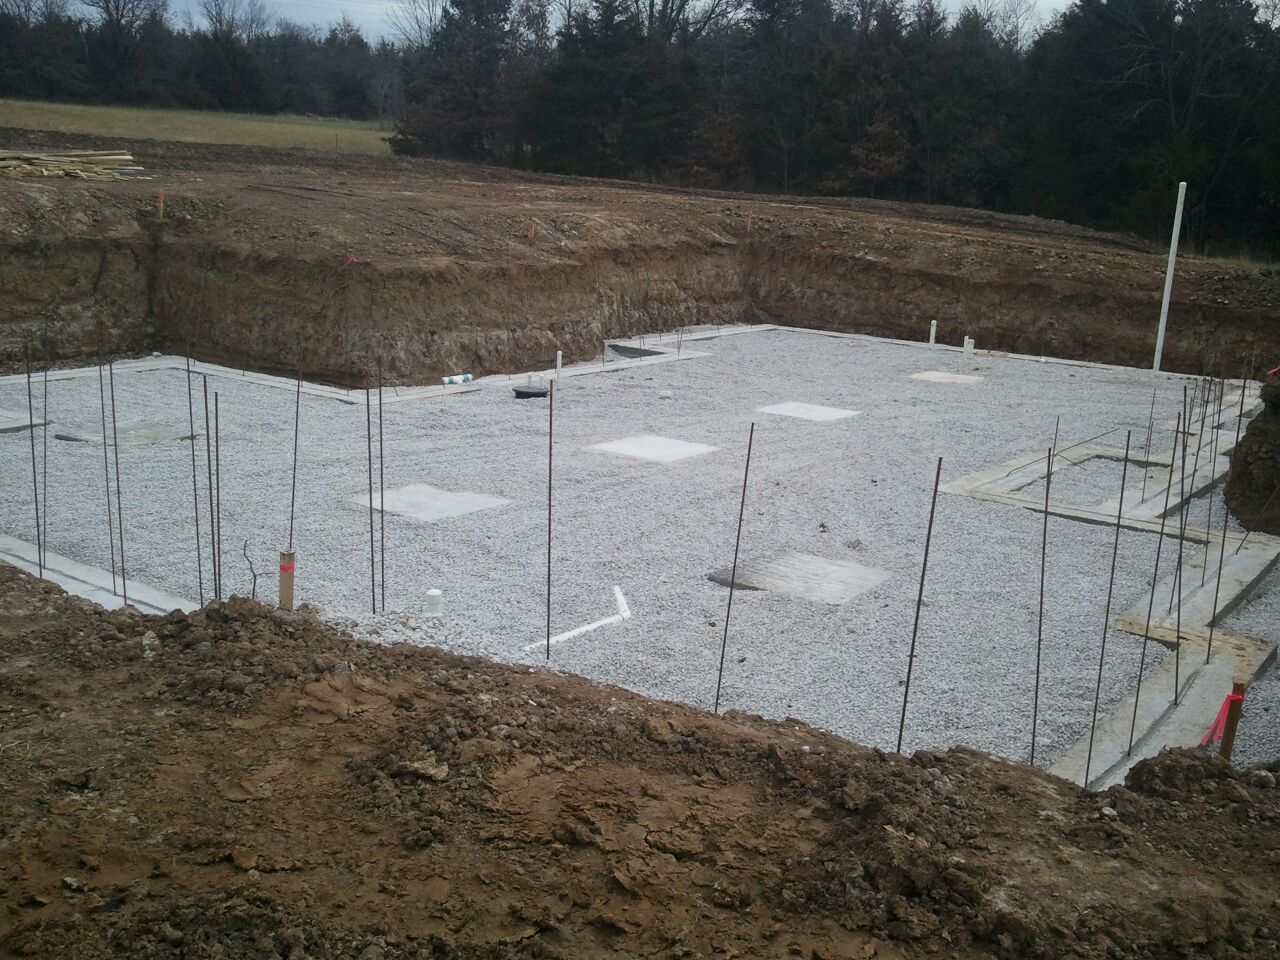 Concrete footings ready for basement wall forms.